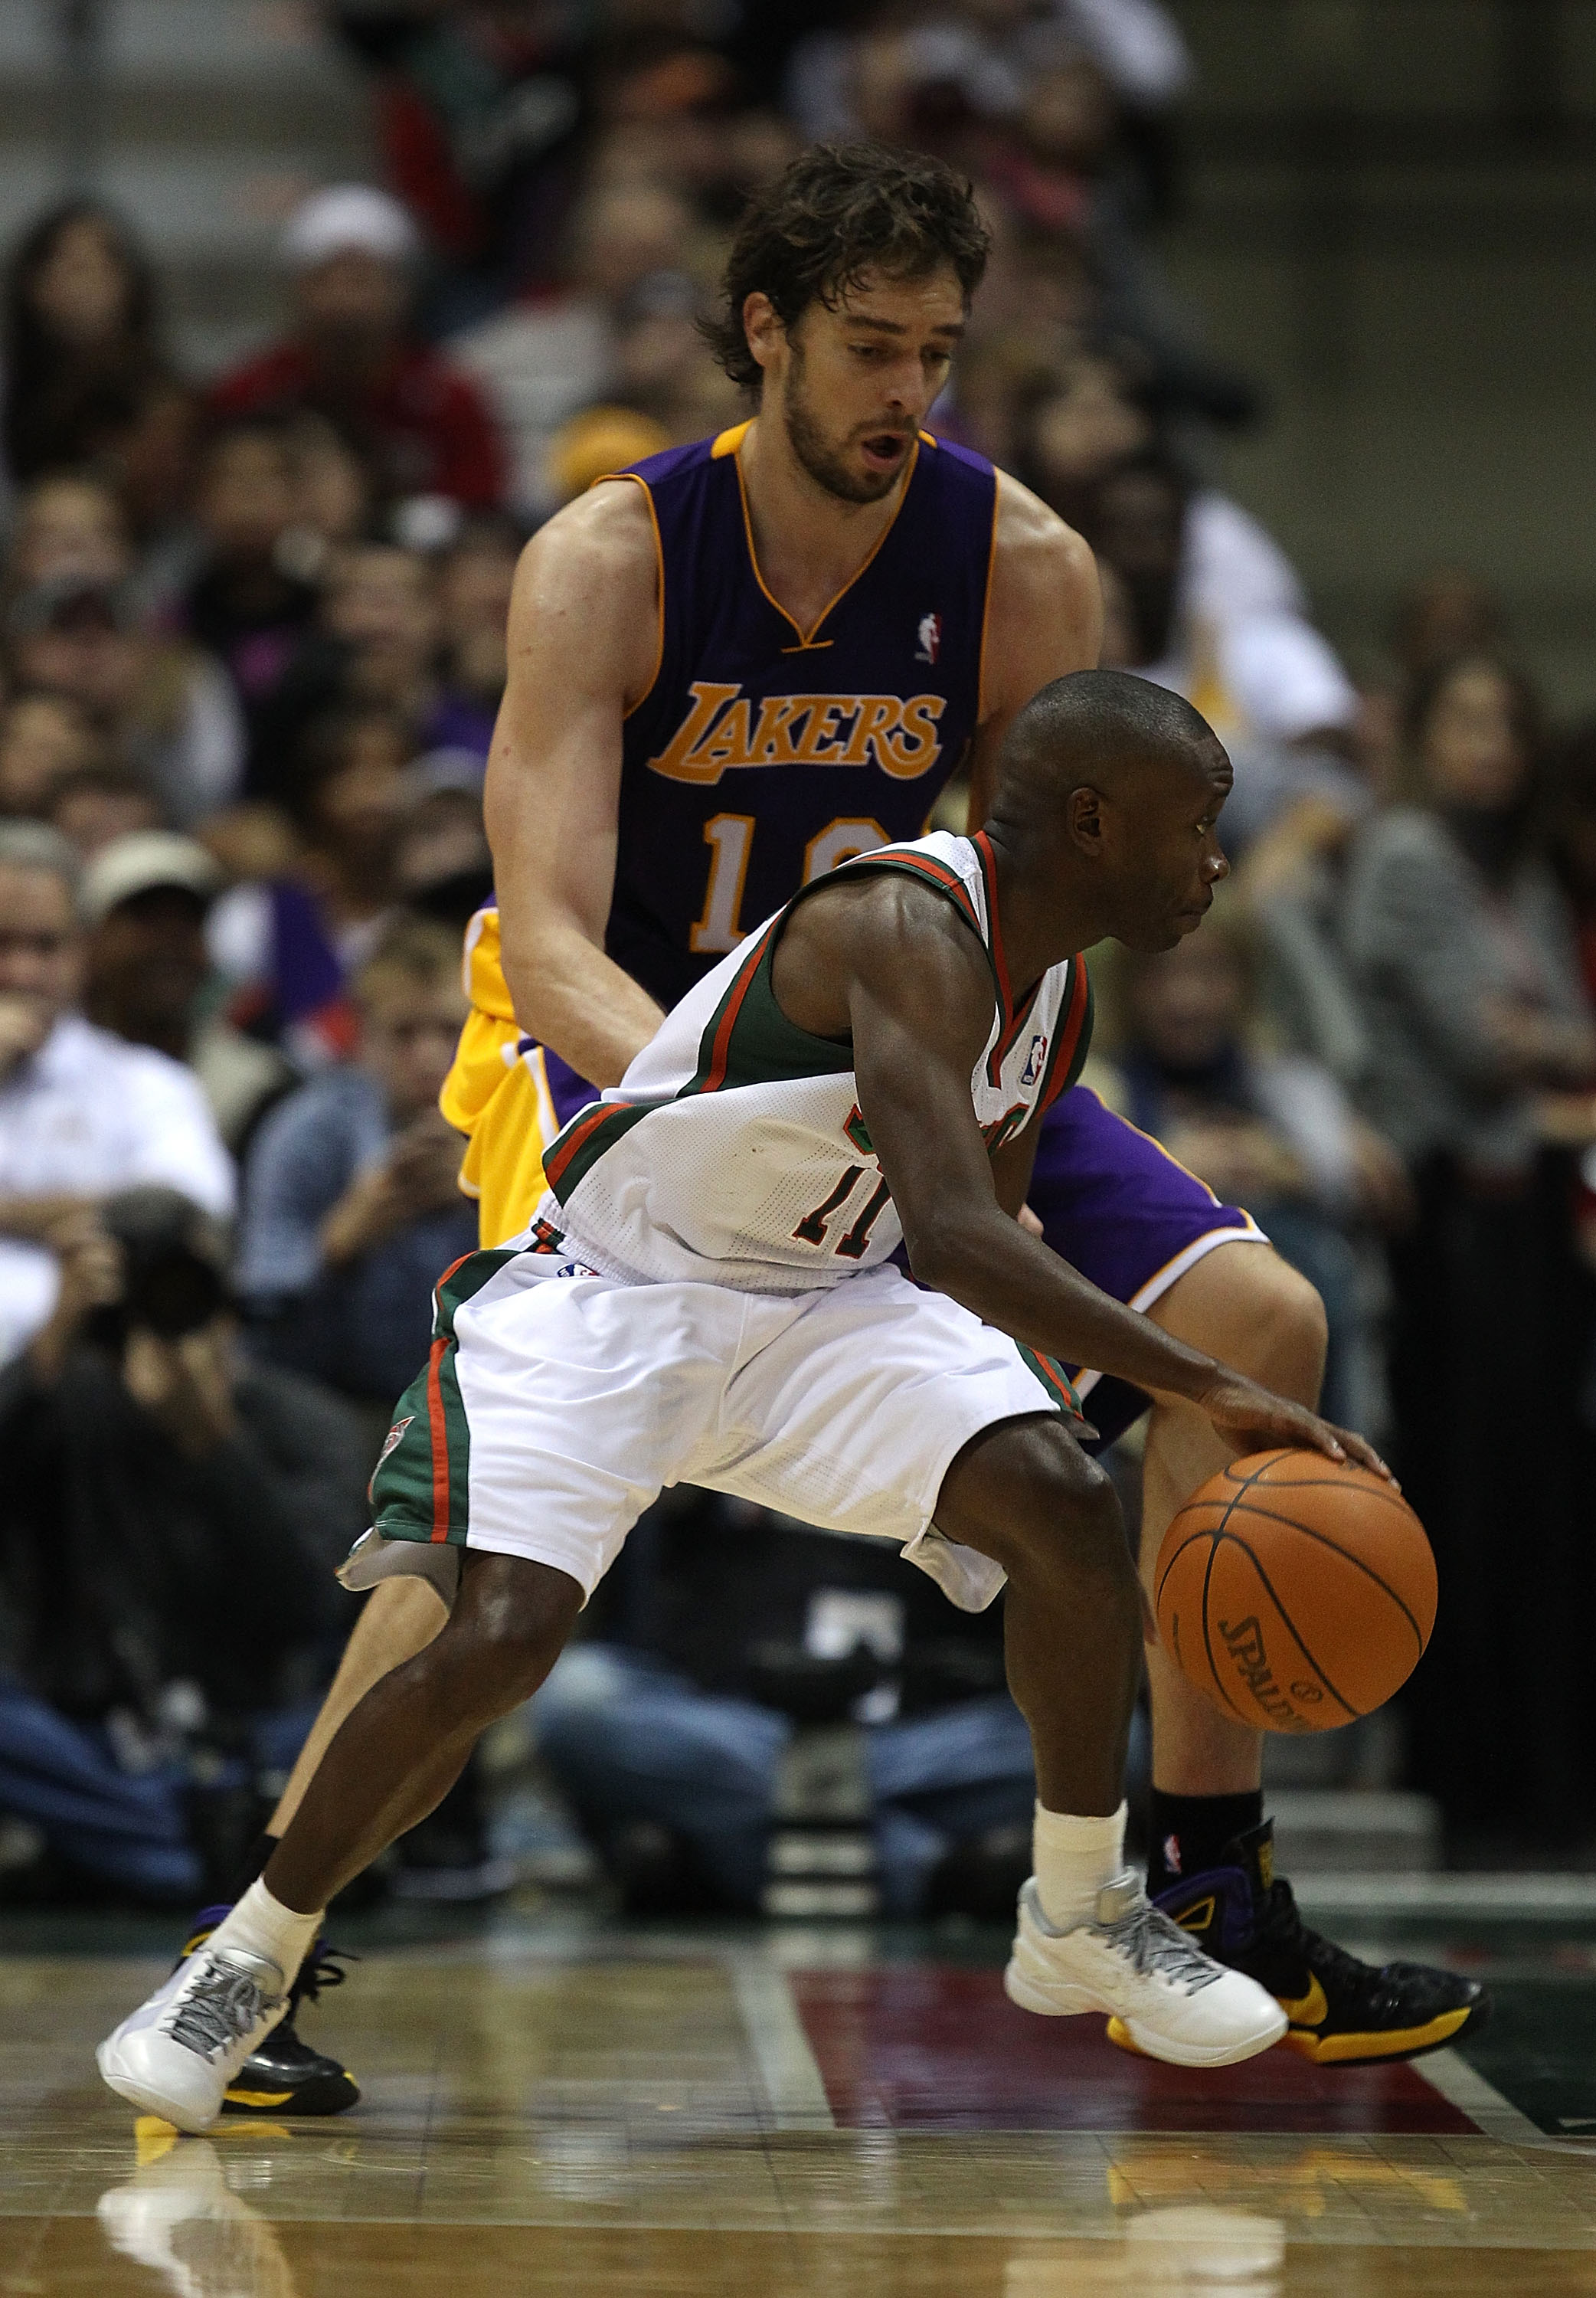 MILWAUKEE - NOVEMBER 16: Earl Boykins #11 of the Milwaukee Bucks dribbles around Pau Gasol #16 of the Los Angeles Lakers at the Bradley Center on November 16, 2010 in Milwaukee, Wisconsin. The Lakers defeated the Bucks 118-107. NOTE TO USER: User expressl